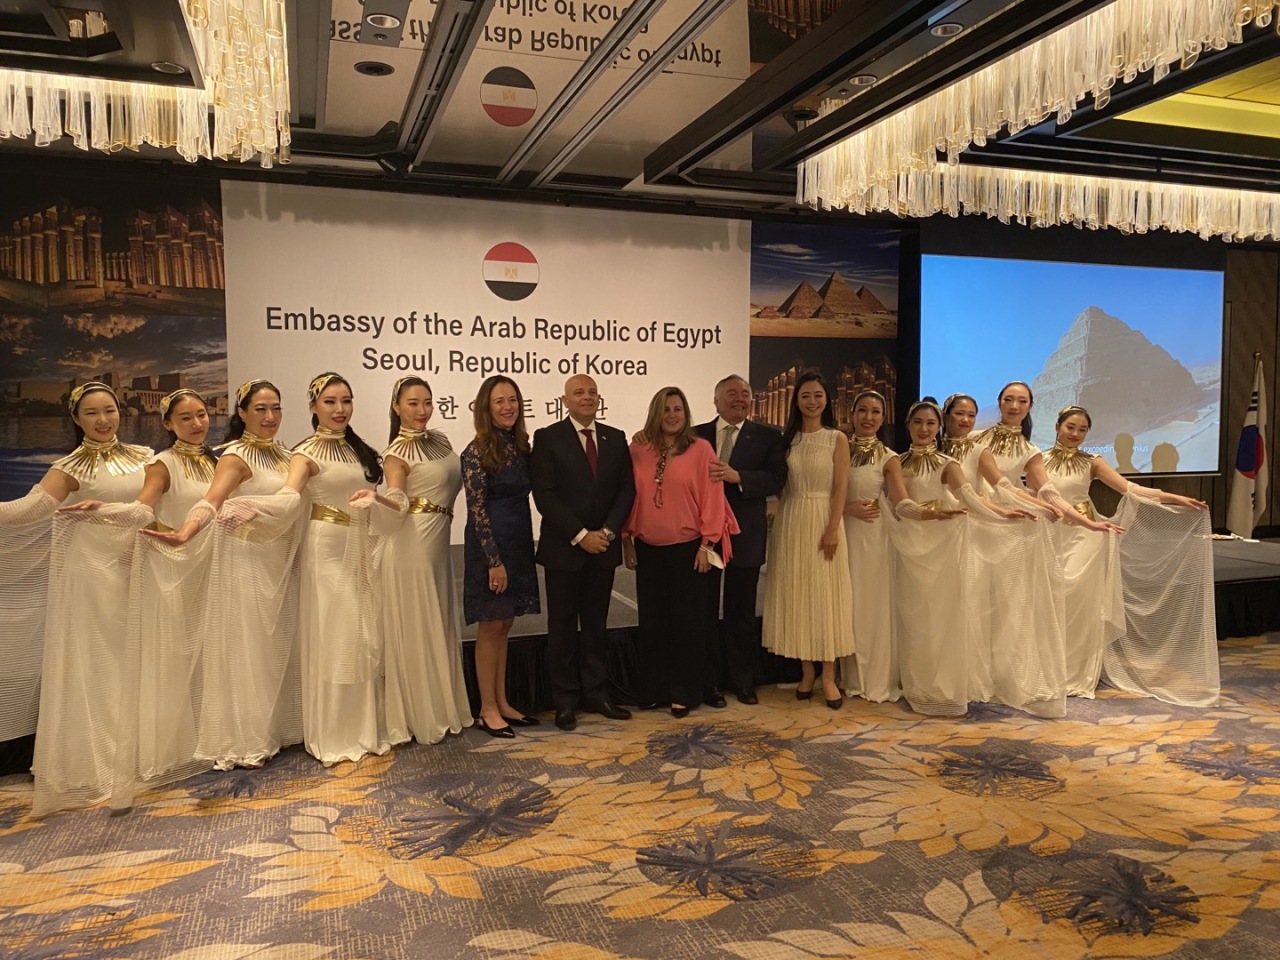 Egyptian Ambassador Khaled Abdel Rahman poses for group photo with his spouse and artists for Egypt’s National Day celebrations at the Four Seasons Hotel in Seoul, July 22. (Sanjay Kumar/The Korea Herald)